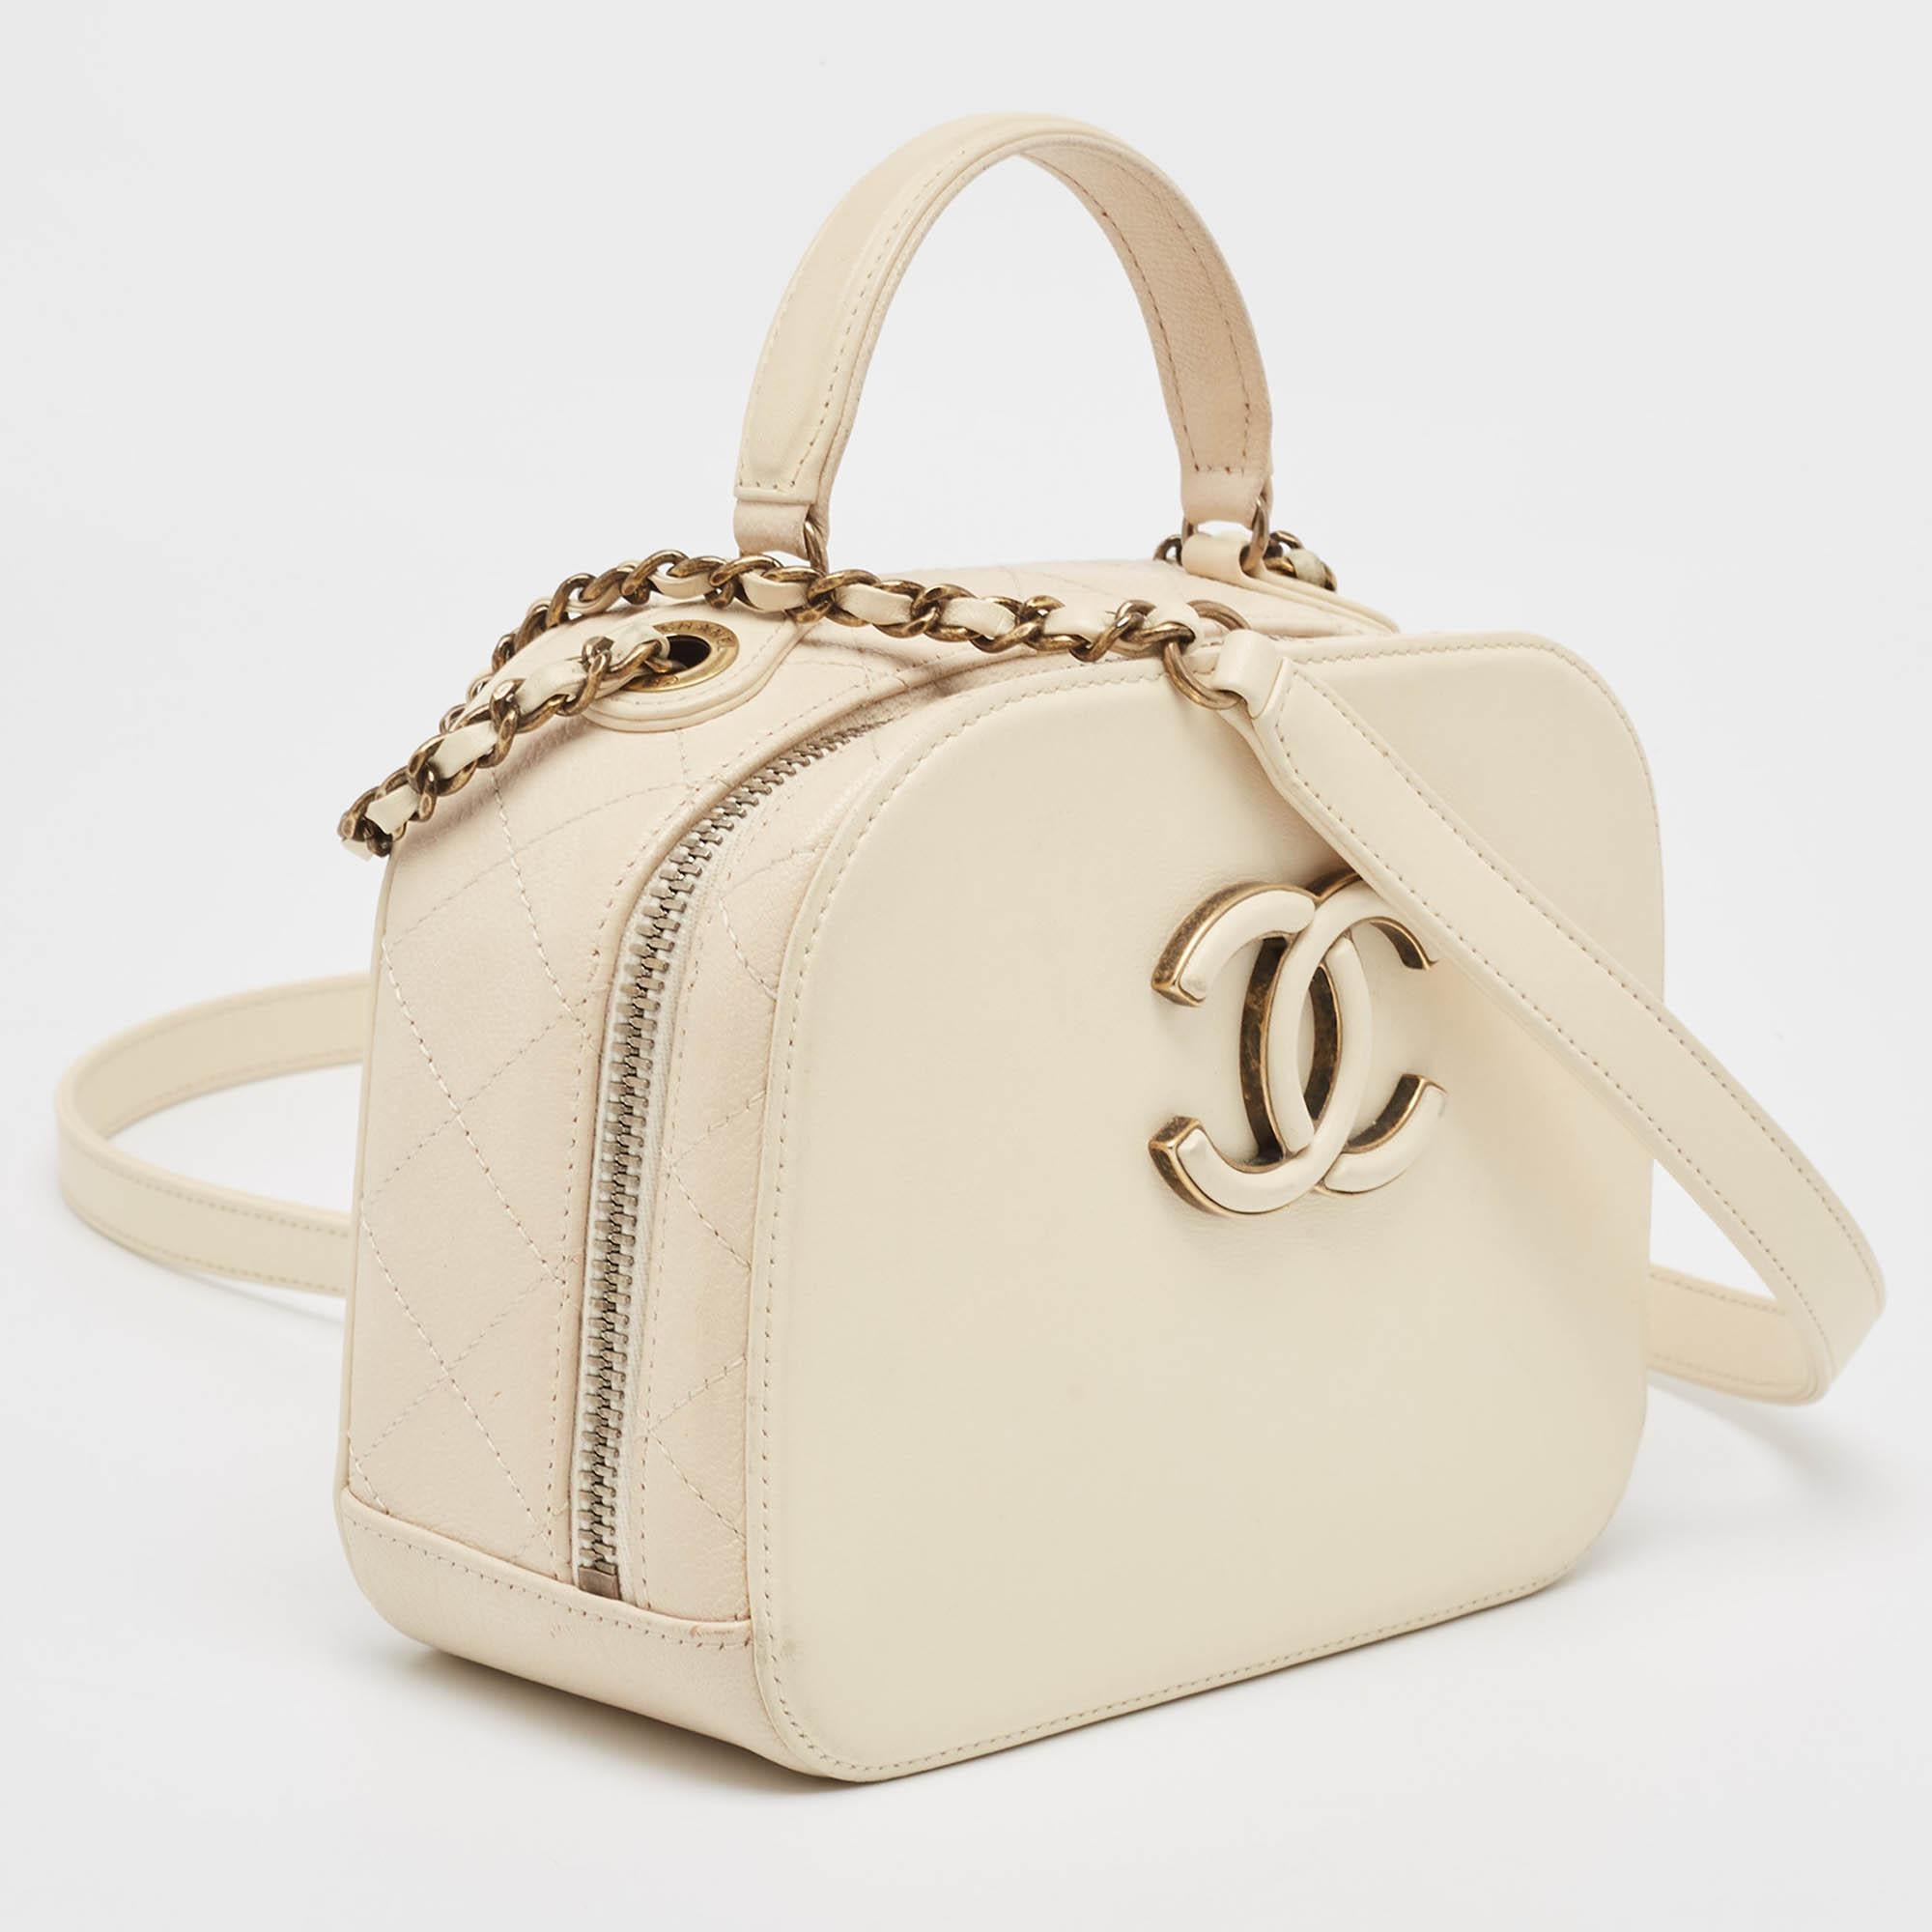 Chanel Off White Quilted Leather Coco Curve Vanity Case Bag 9